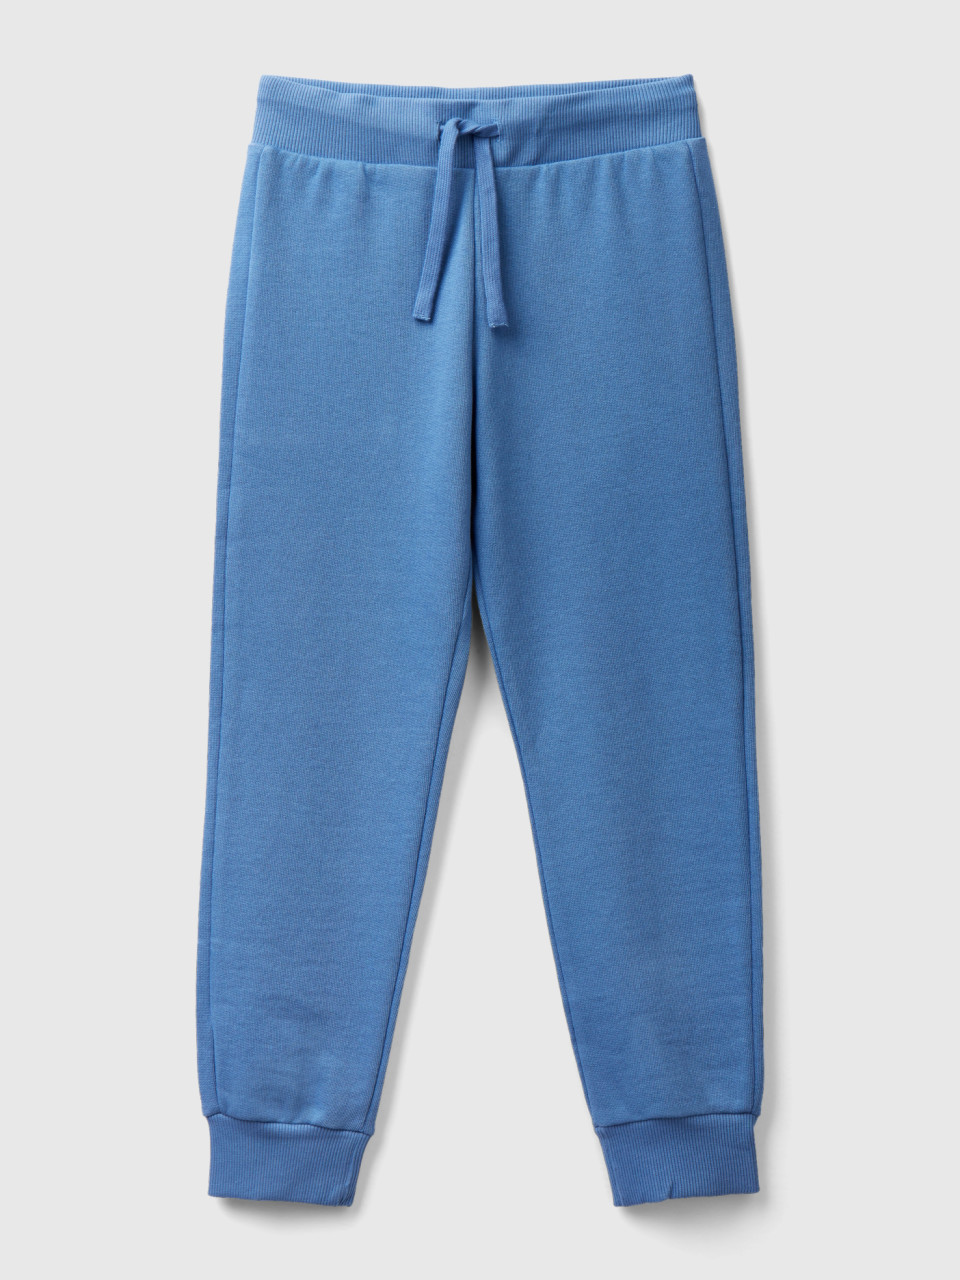 Benetton, Sporty Trousers With Drawstring, Light Blue, Kids